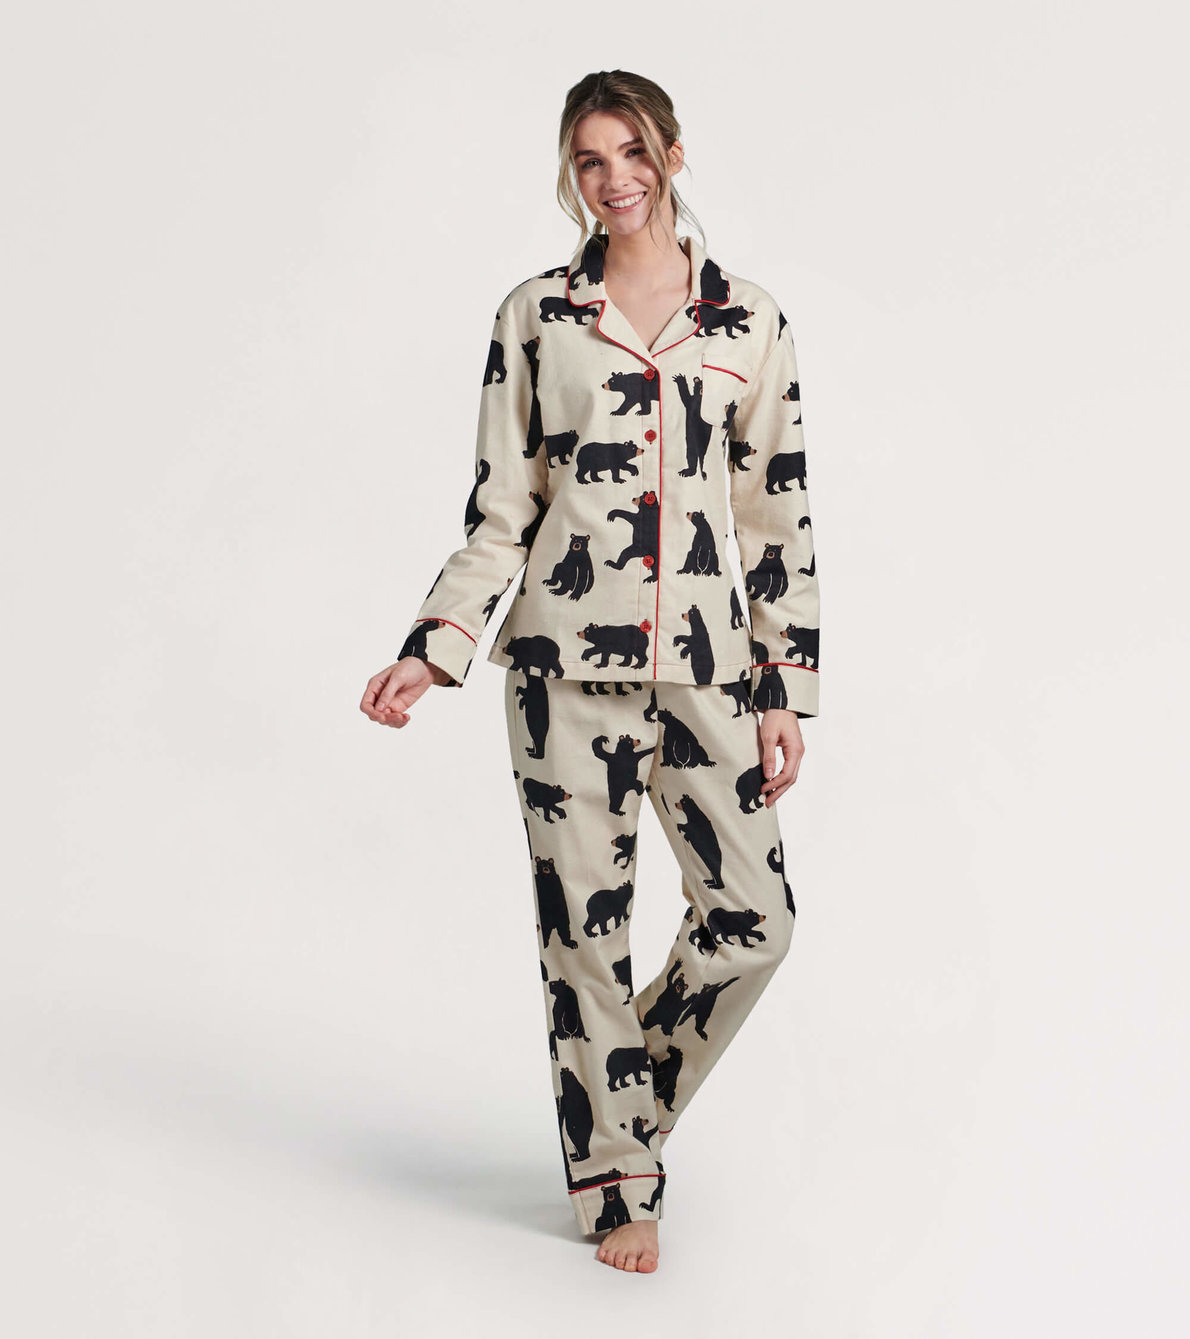 View larger image of Women's Black Bears Flannel Pajama Set